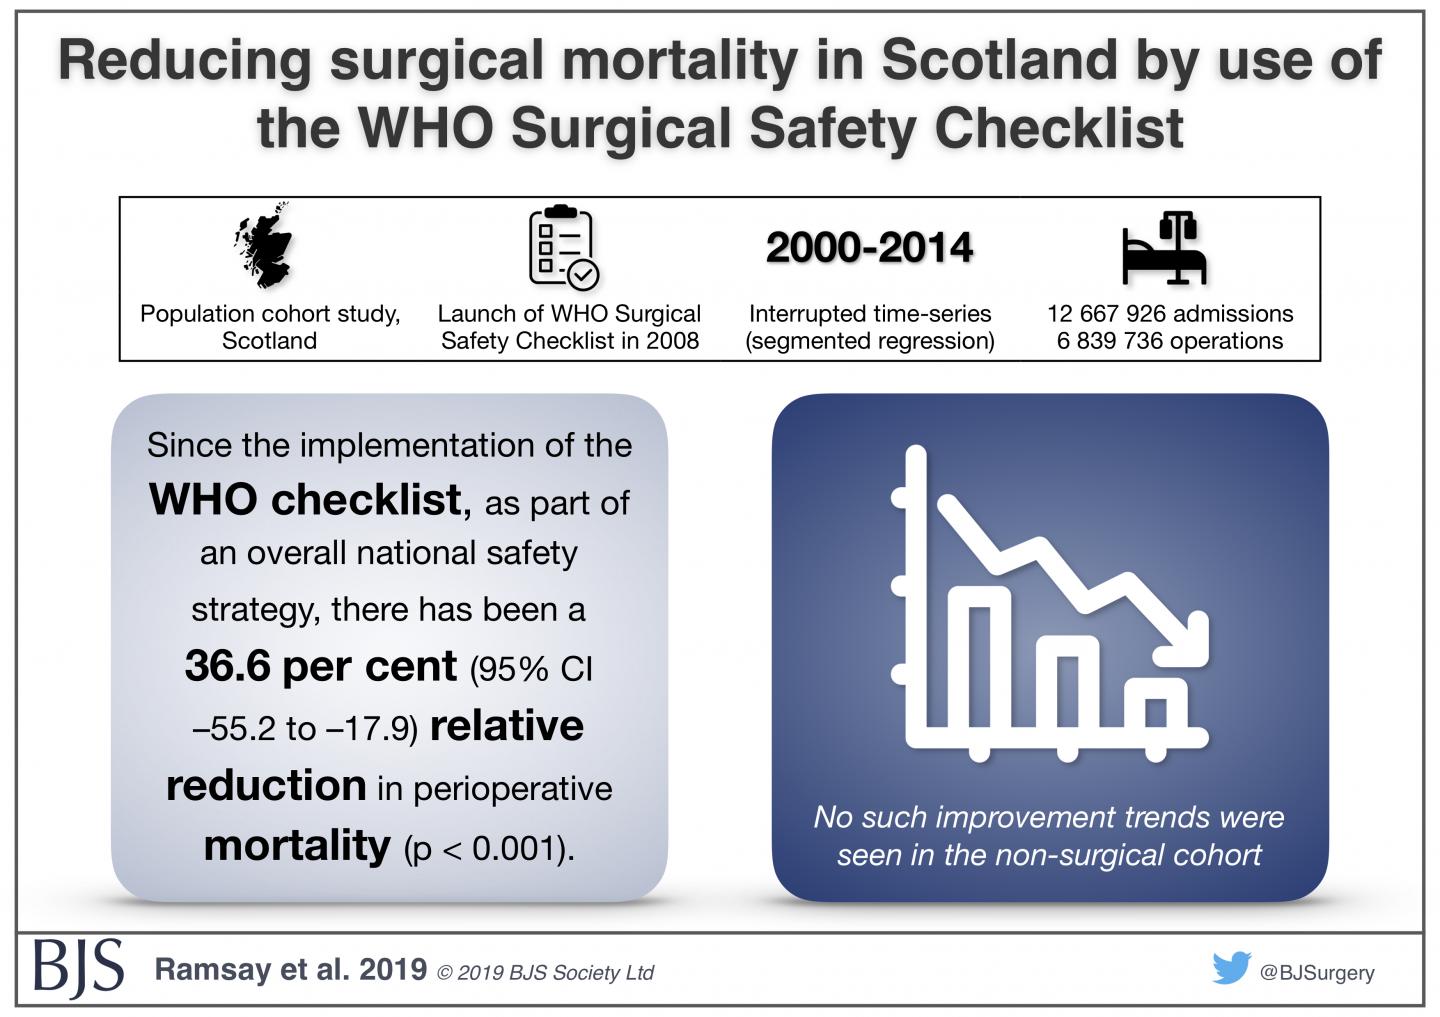 Hospital Deaths After Surgery Fell by a Third Following the Launch of Surgical Safety Checklists in Scotland